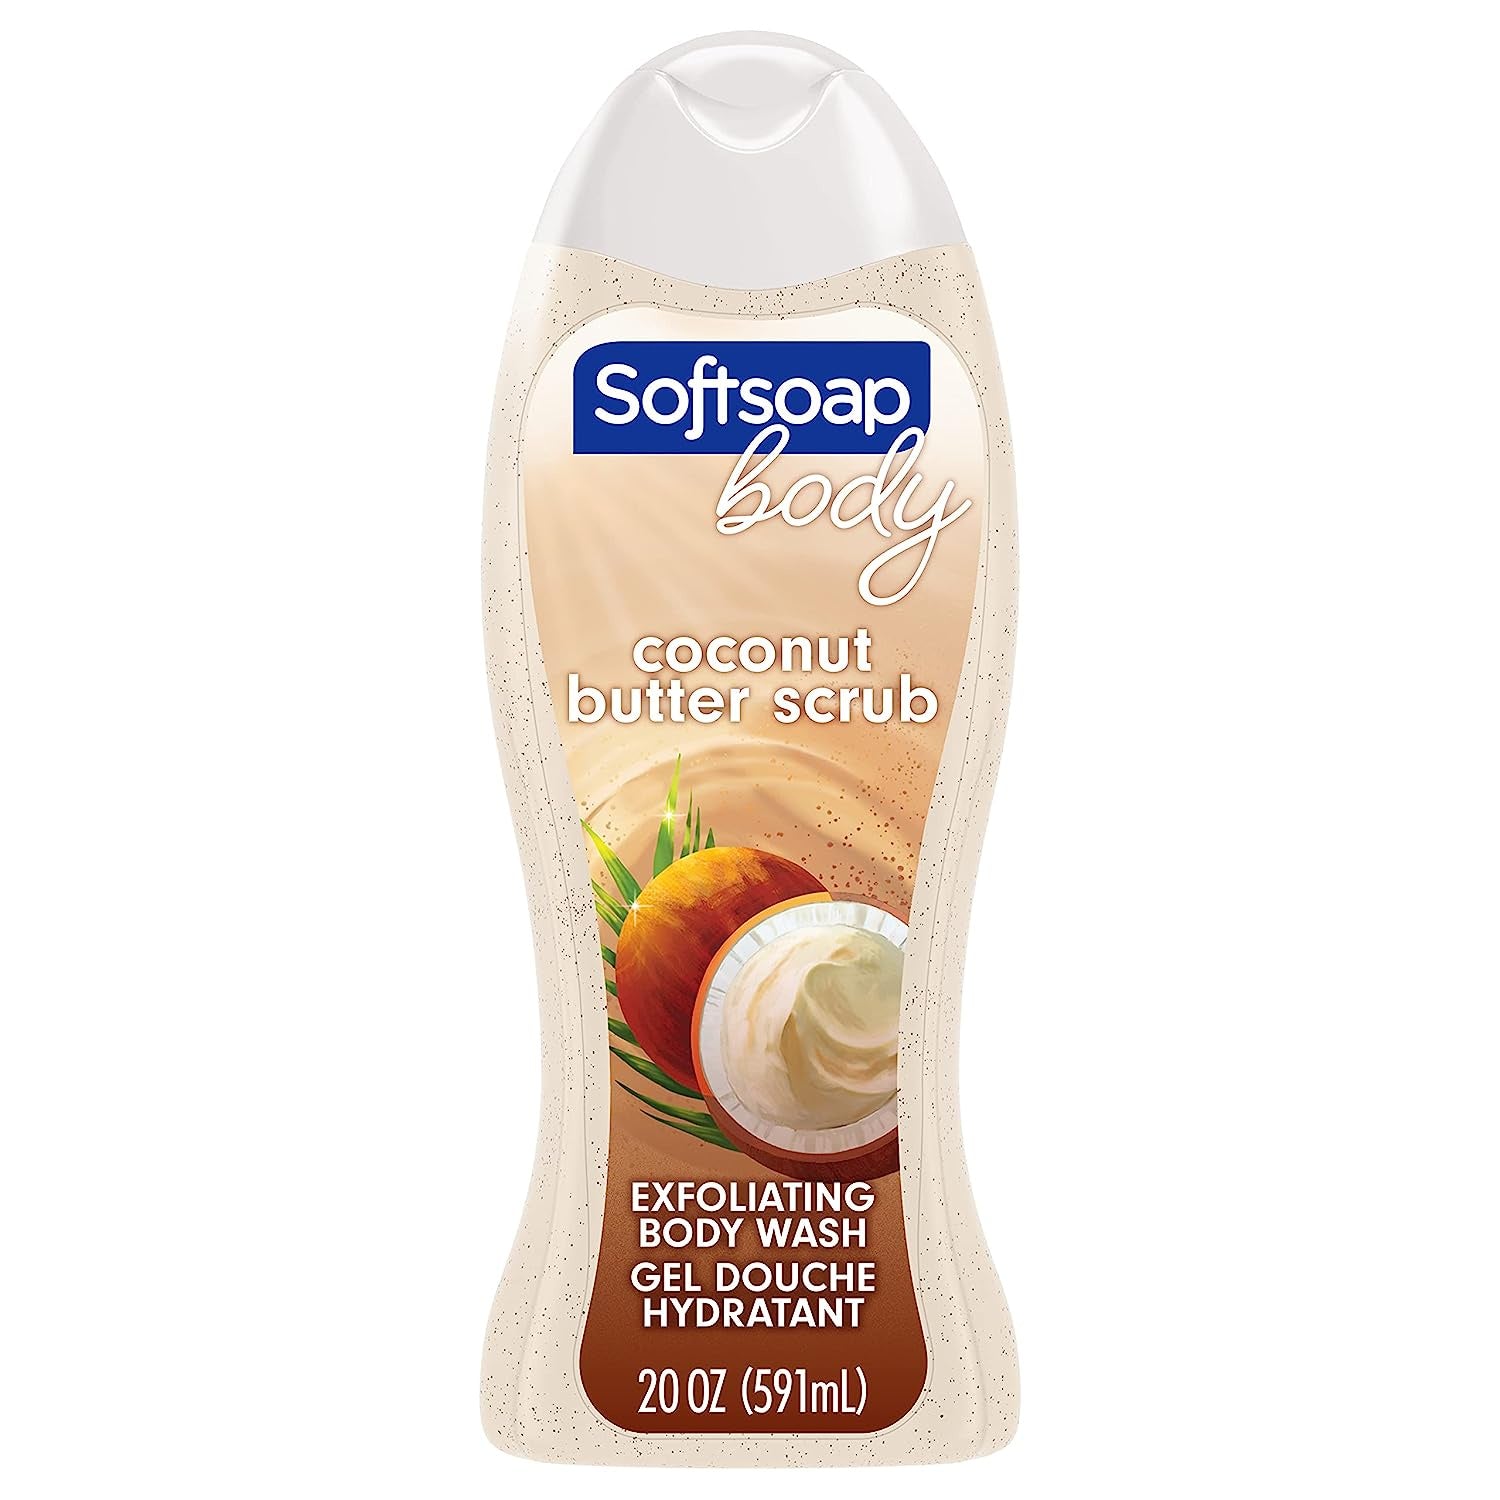 Softsoap Body Exfoliating Coconut Butter 20oz